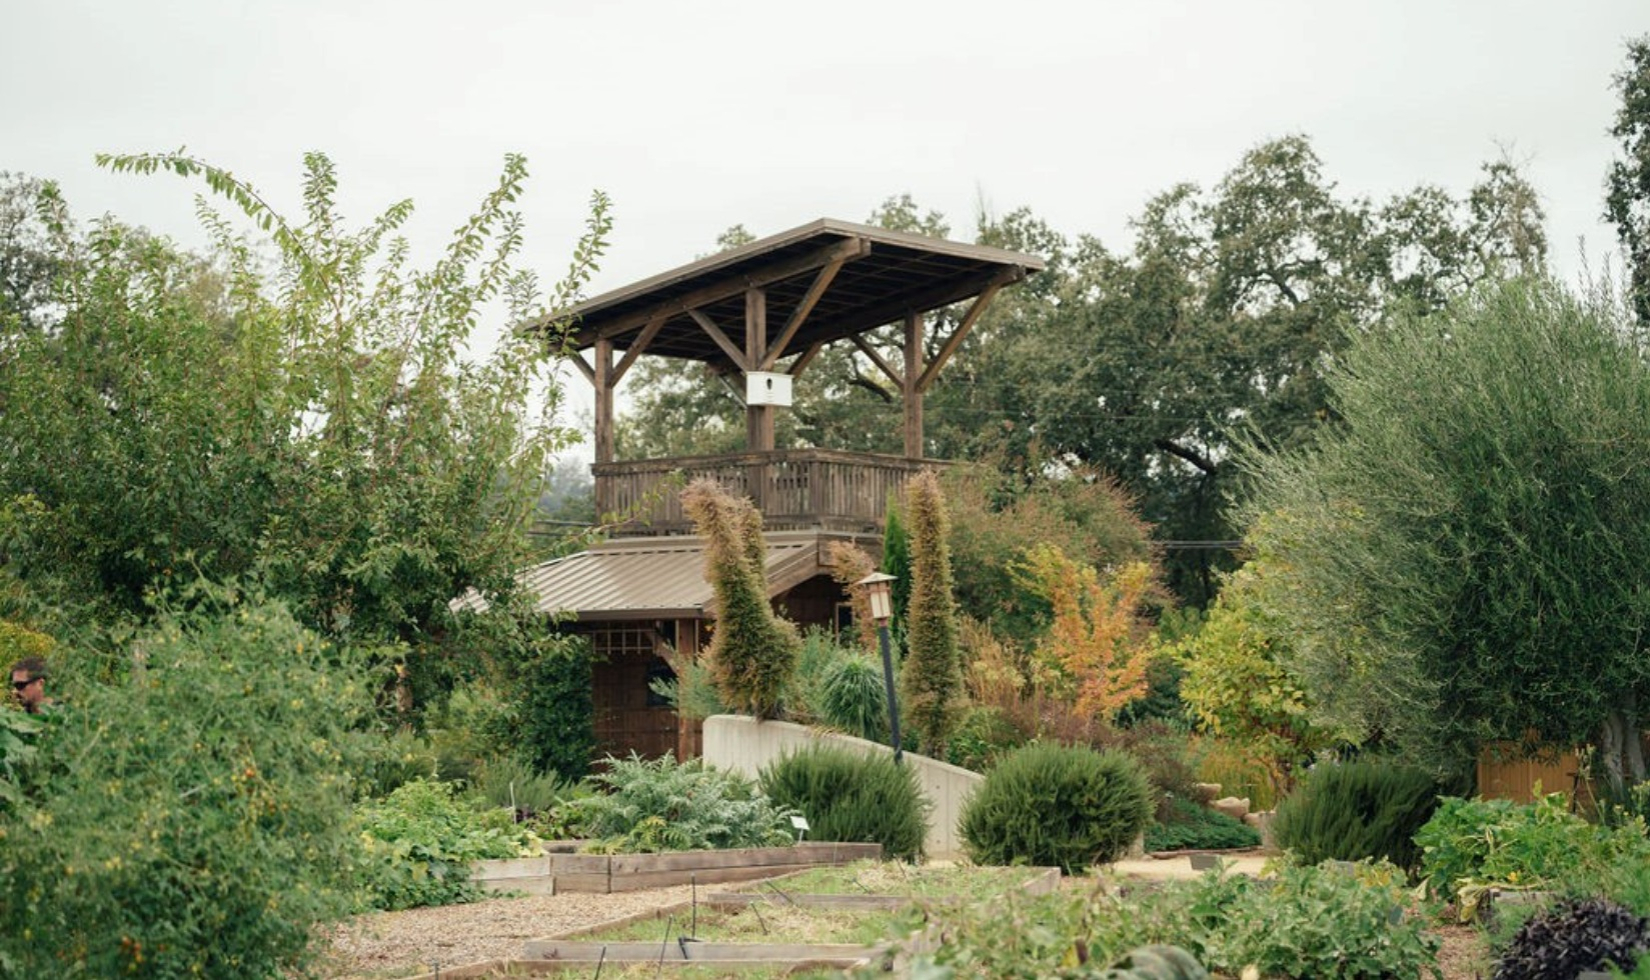 Garden with multiple planters and viewing platform at Quivira winery